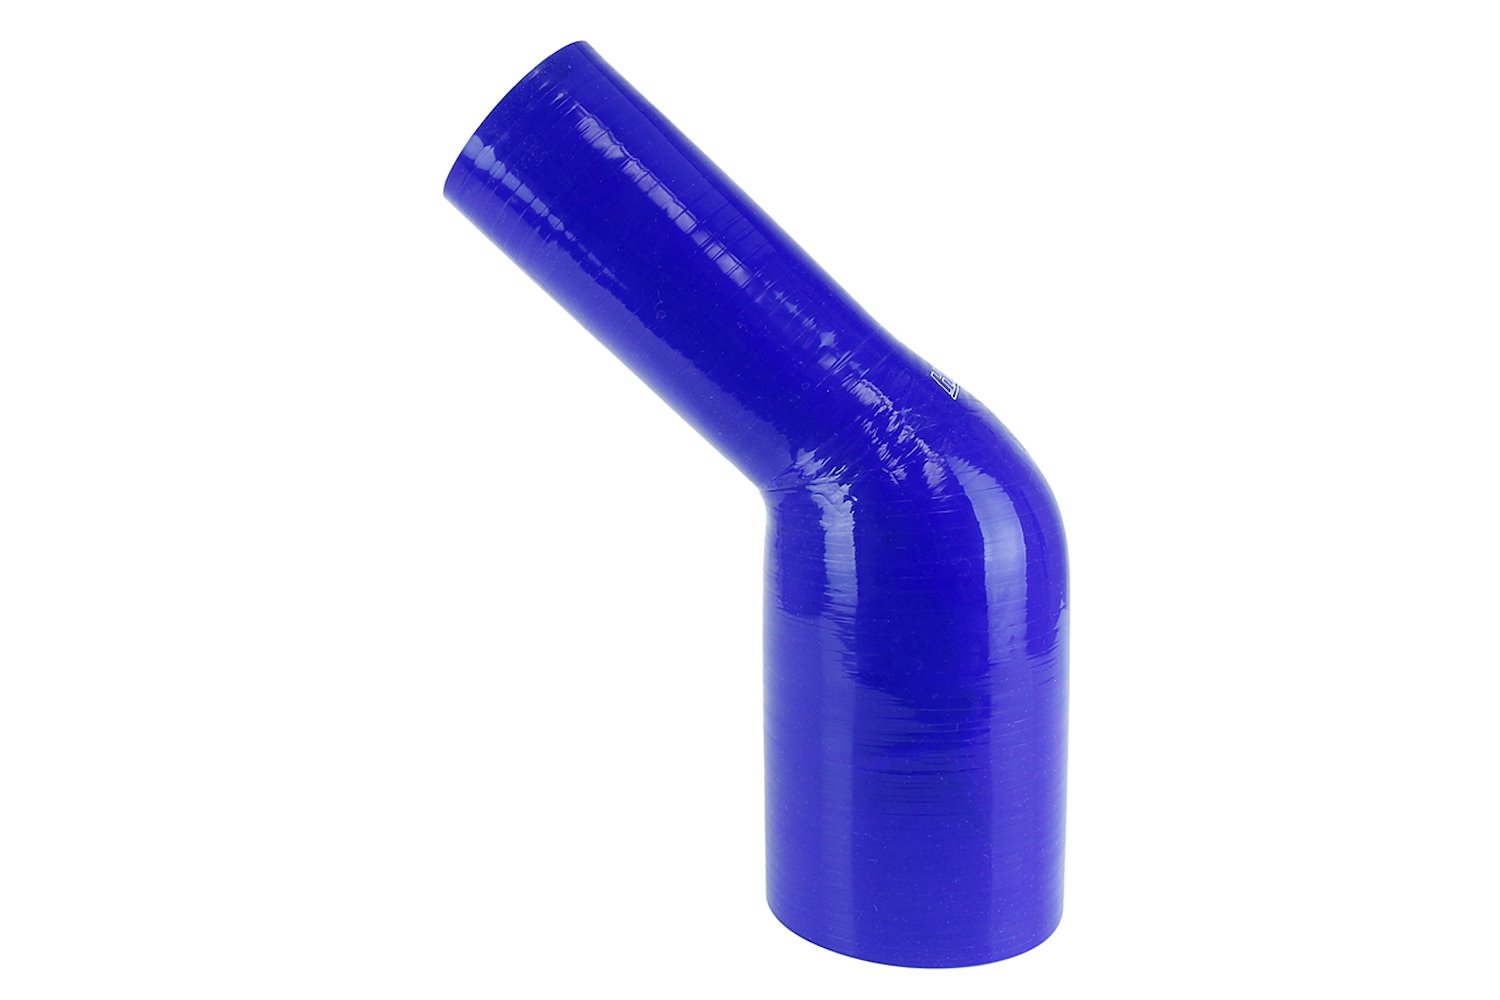 HTSER45-200-325-BLUE Silicone 45-Degree Elbow Hose, High-Temp 4-Ply Reinforced, 2 in. - 3-1/4 in. ID, Blue